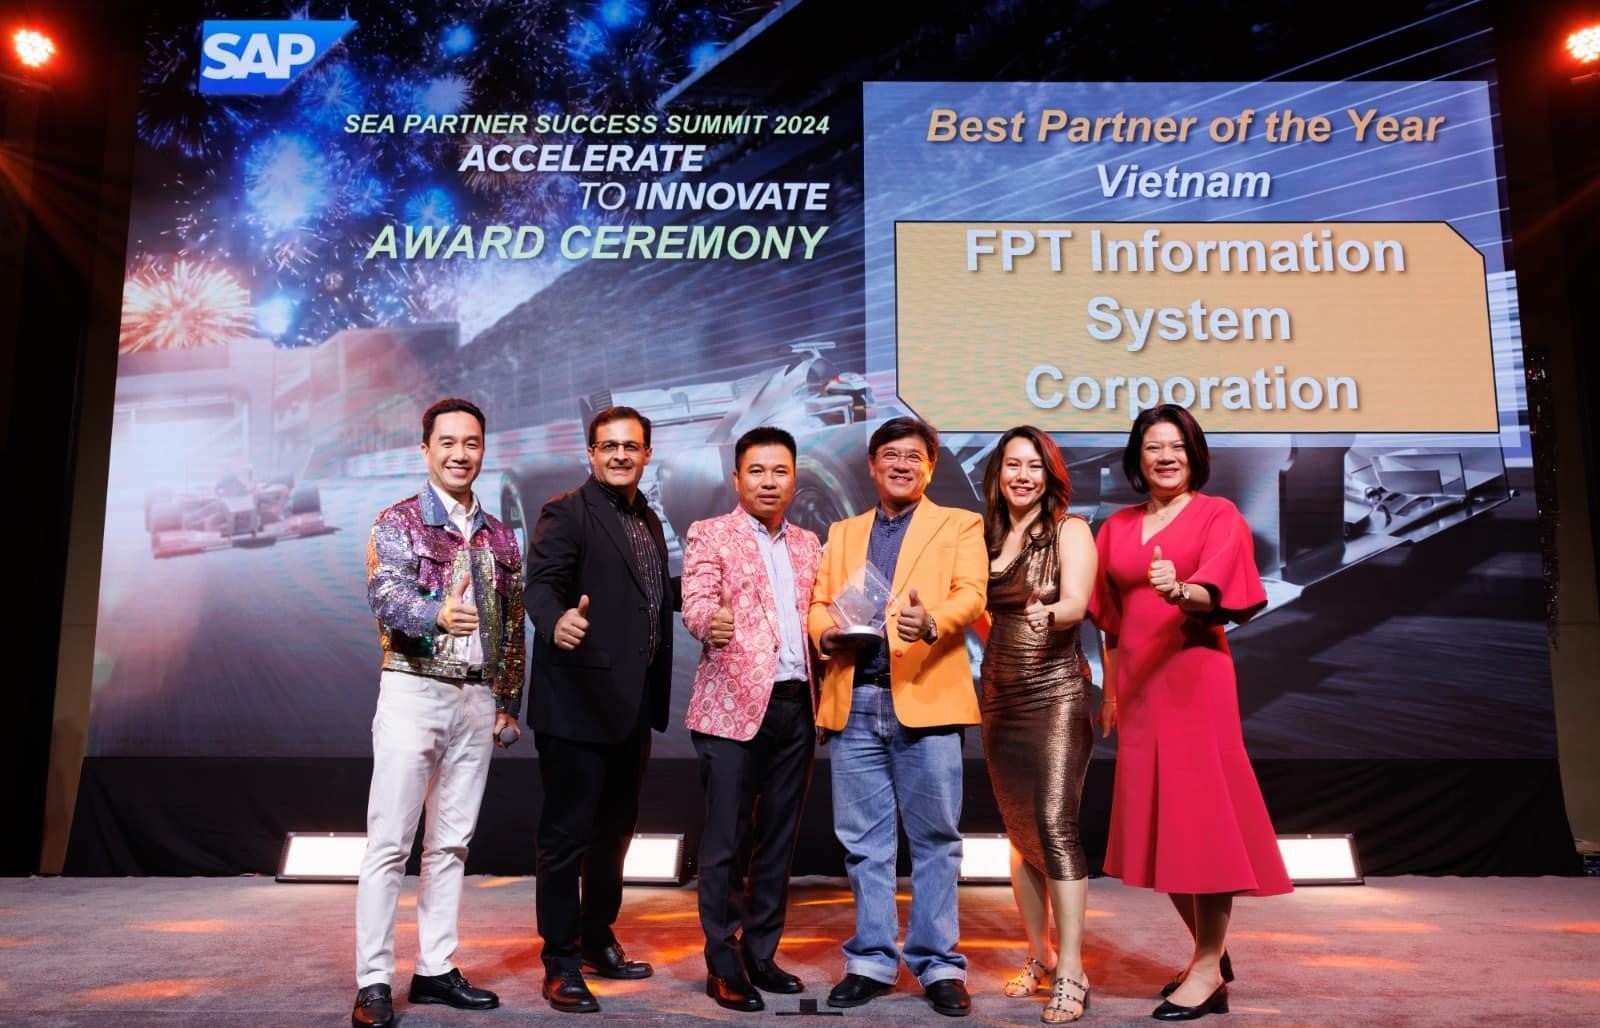 Vietnam's sole representative awarded SAP's Best Partner of the Year